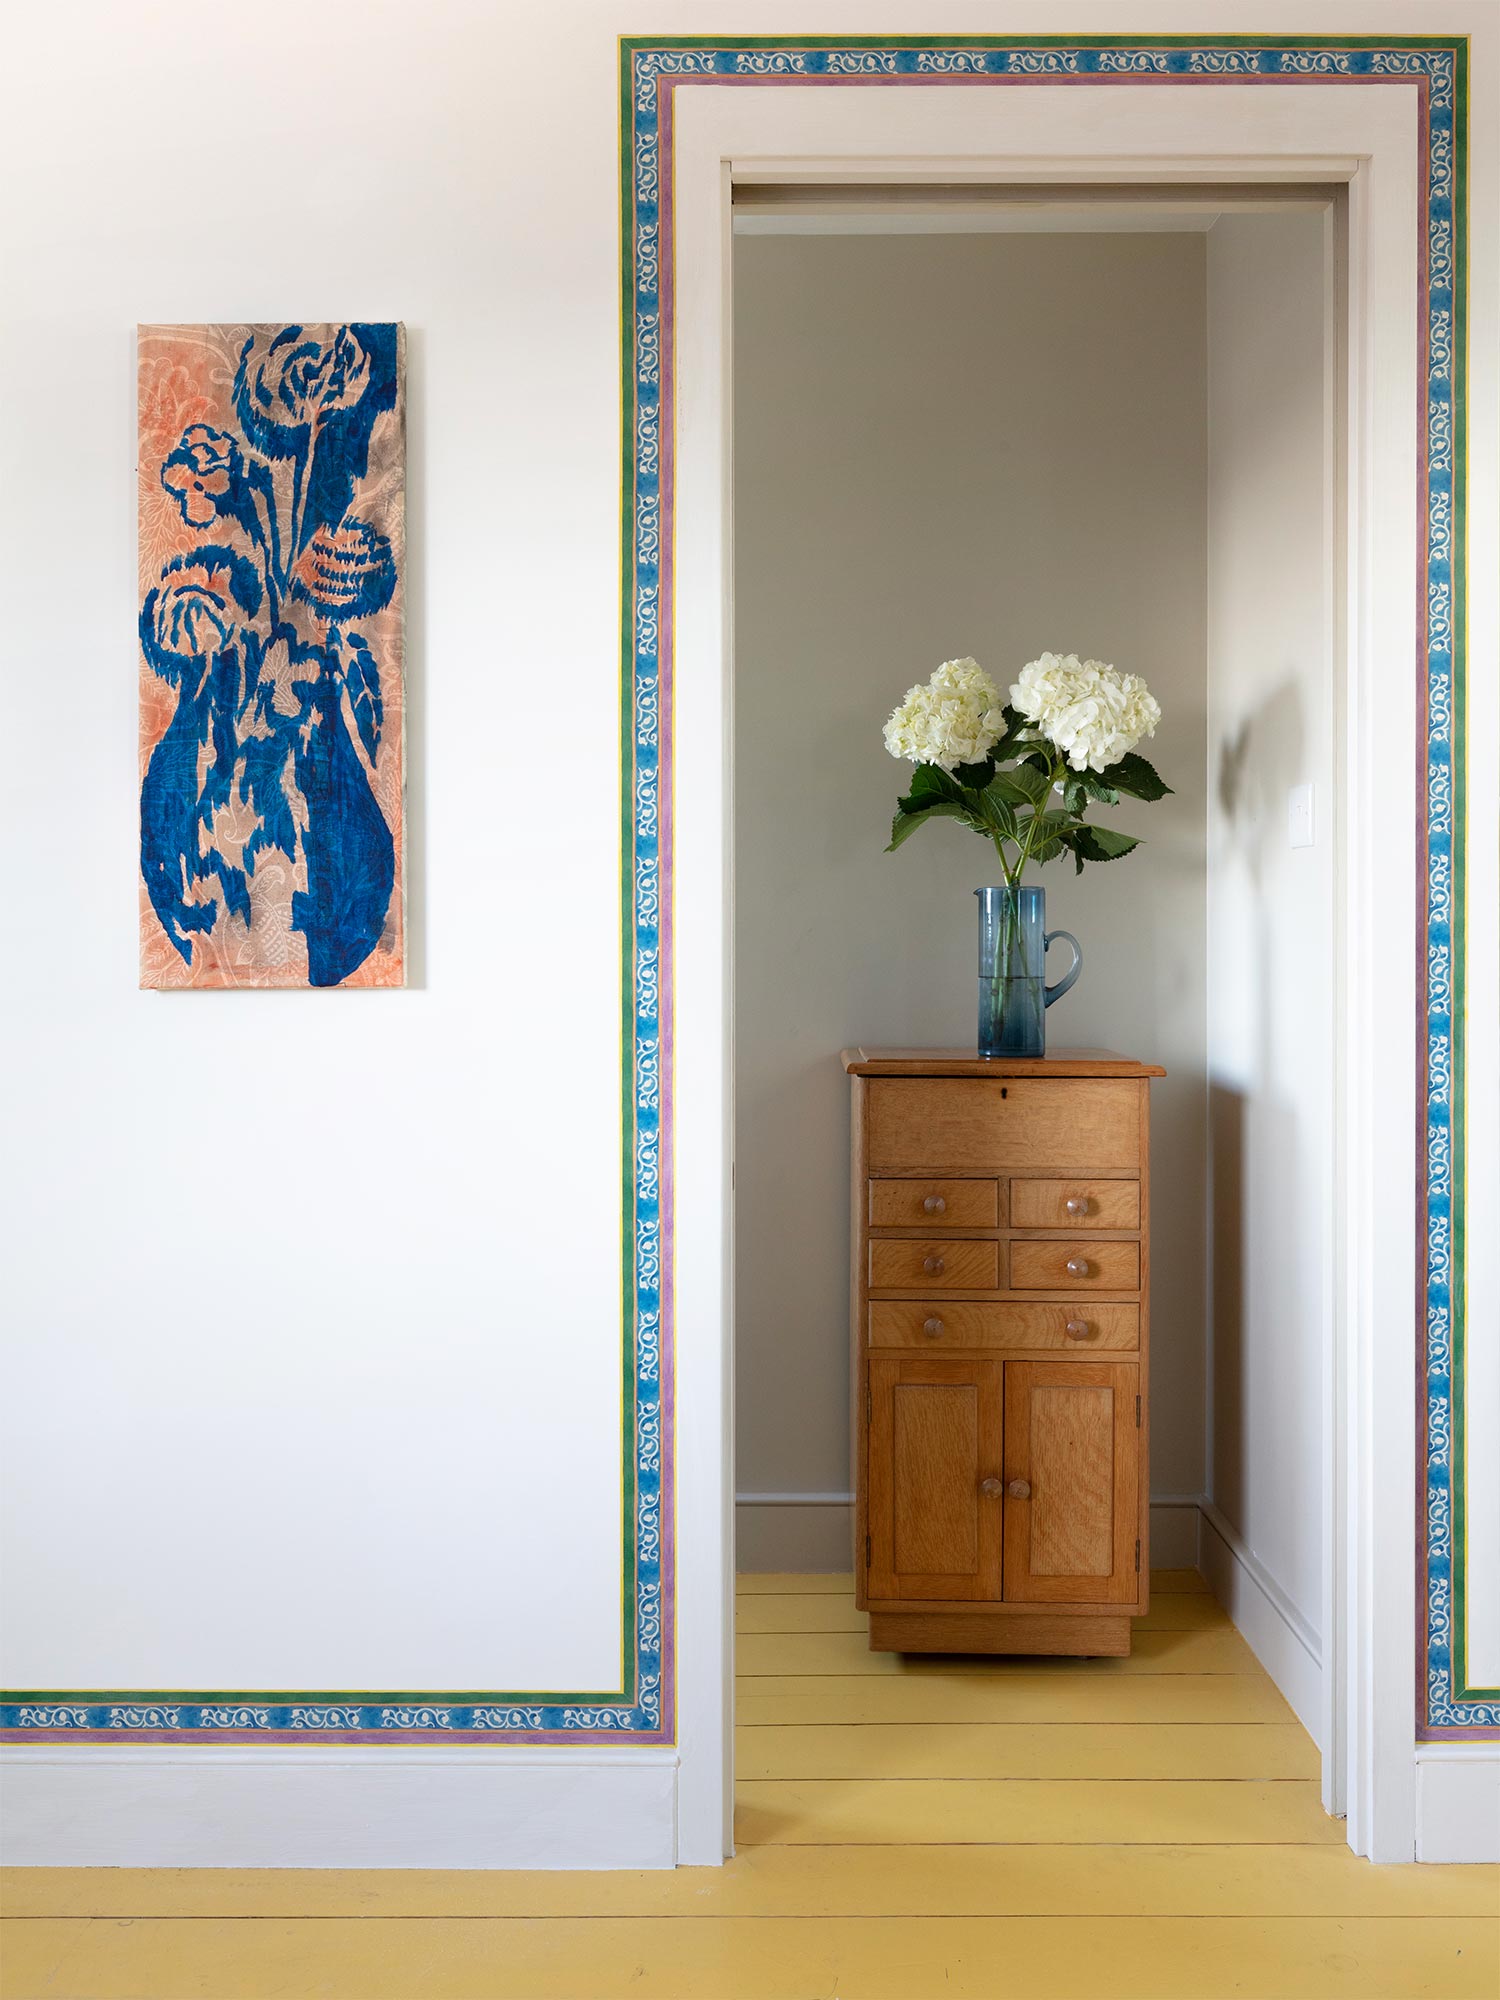 Striped yellow, blue and pink floral wallpaper border from 1918 by Arts & Crafts artist CFA Voysey, pictured with flowers on chest of drawers